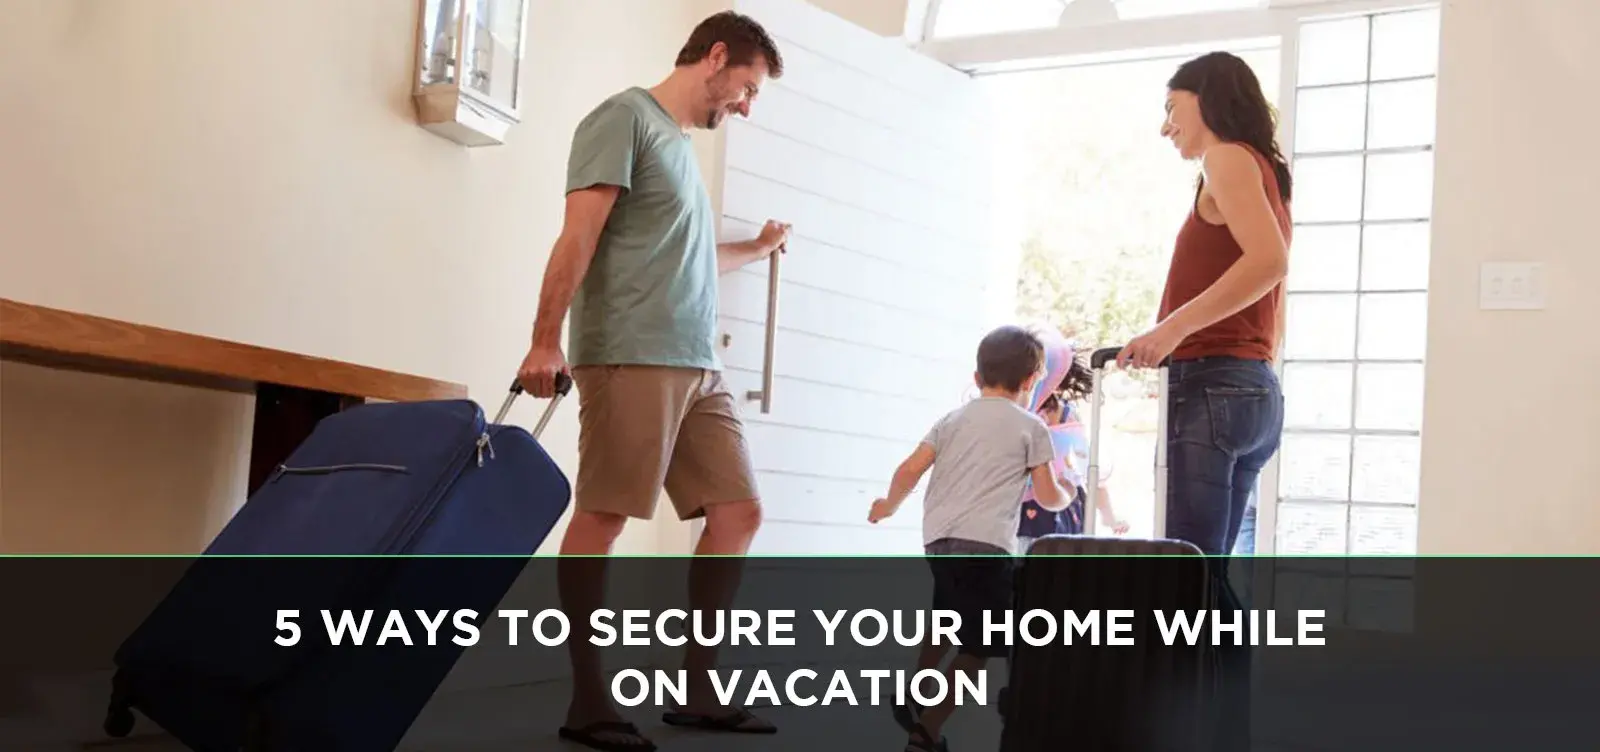 Ways to Secure Your Home While on Vacation | HsforMe